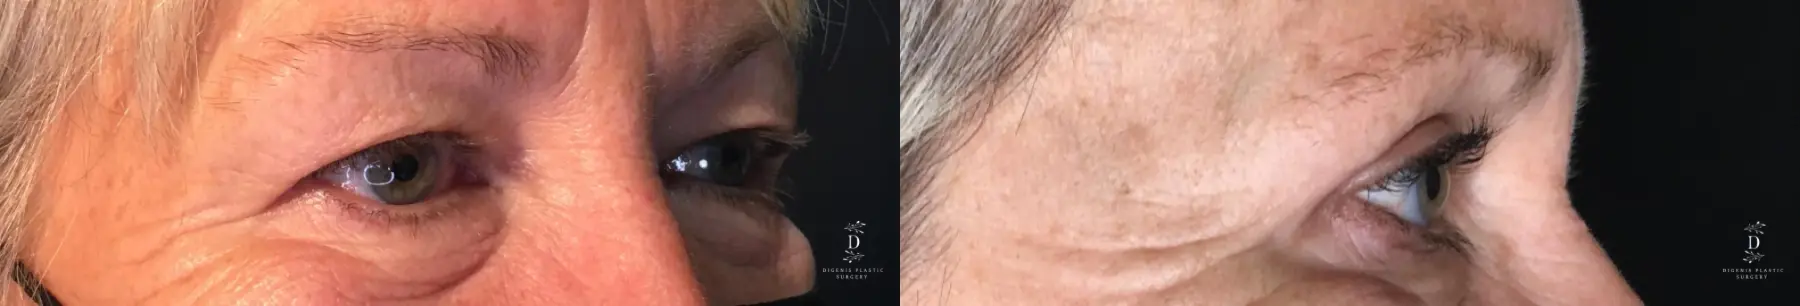 Eyelid Surgery: Patient 33 - Before and After 2